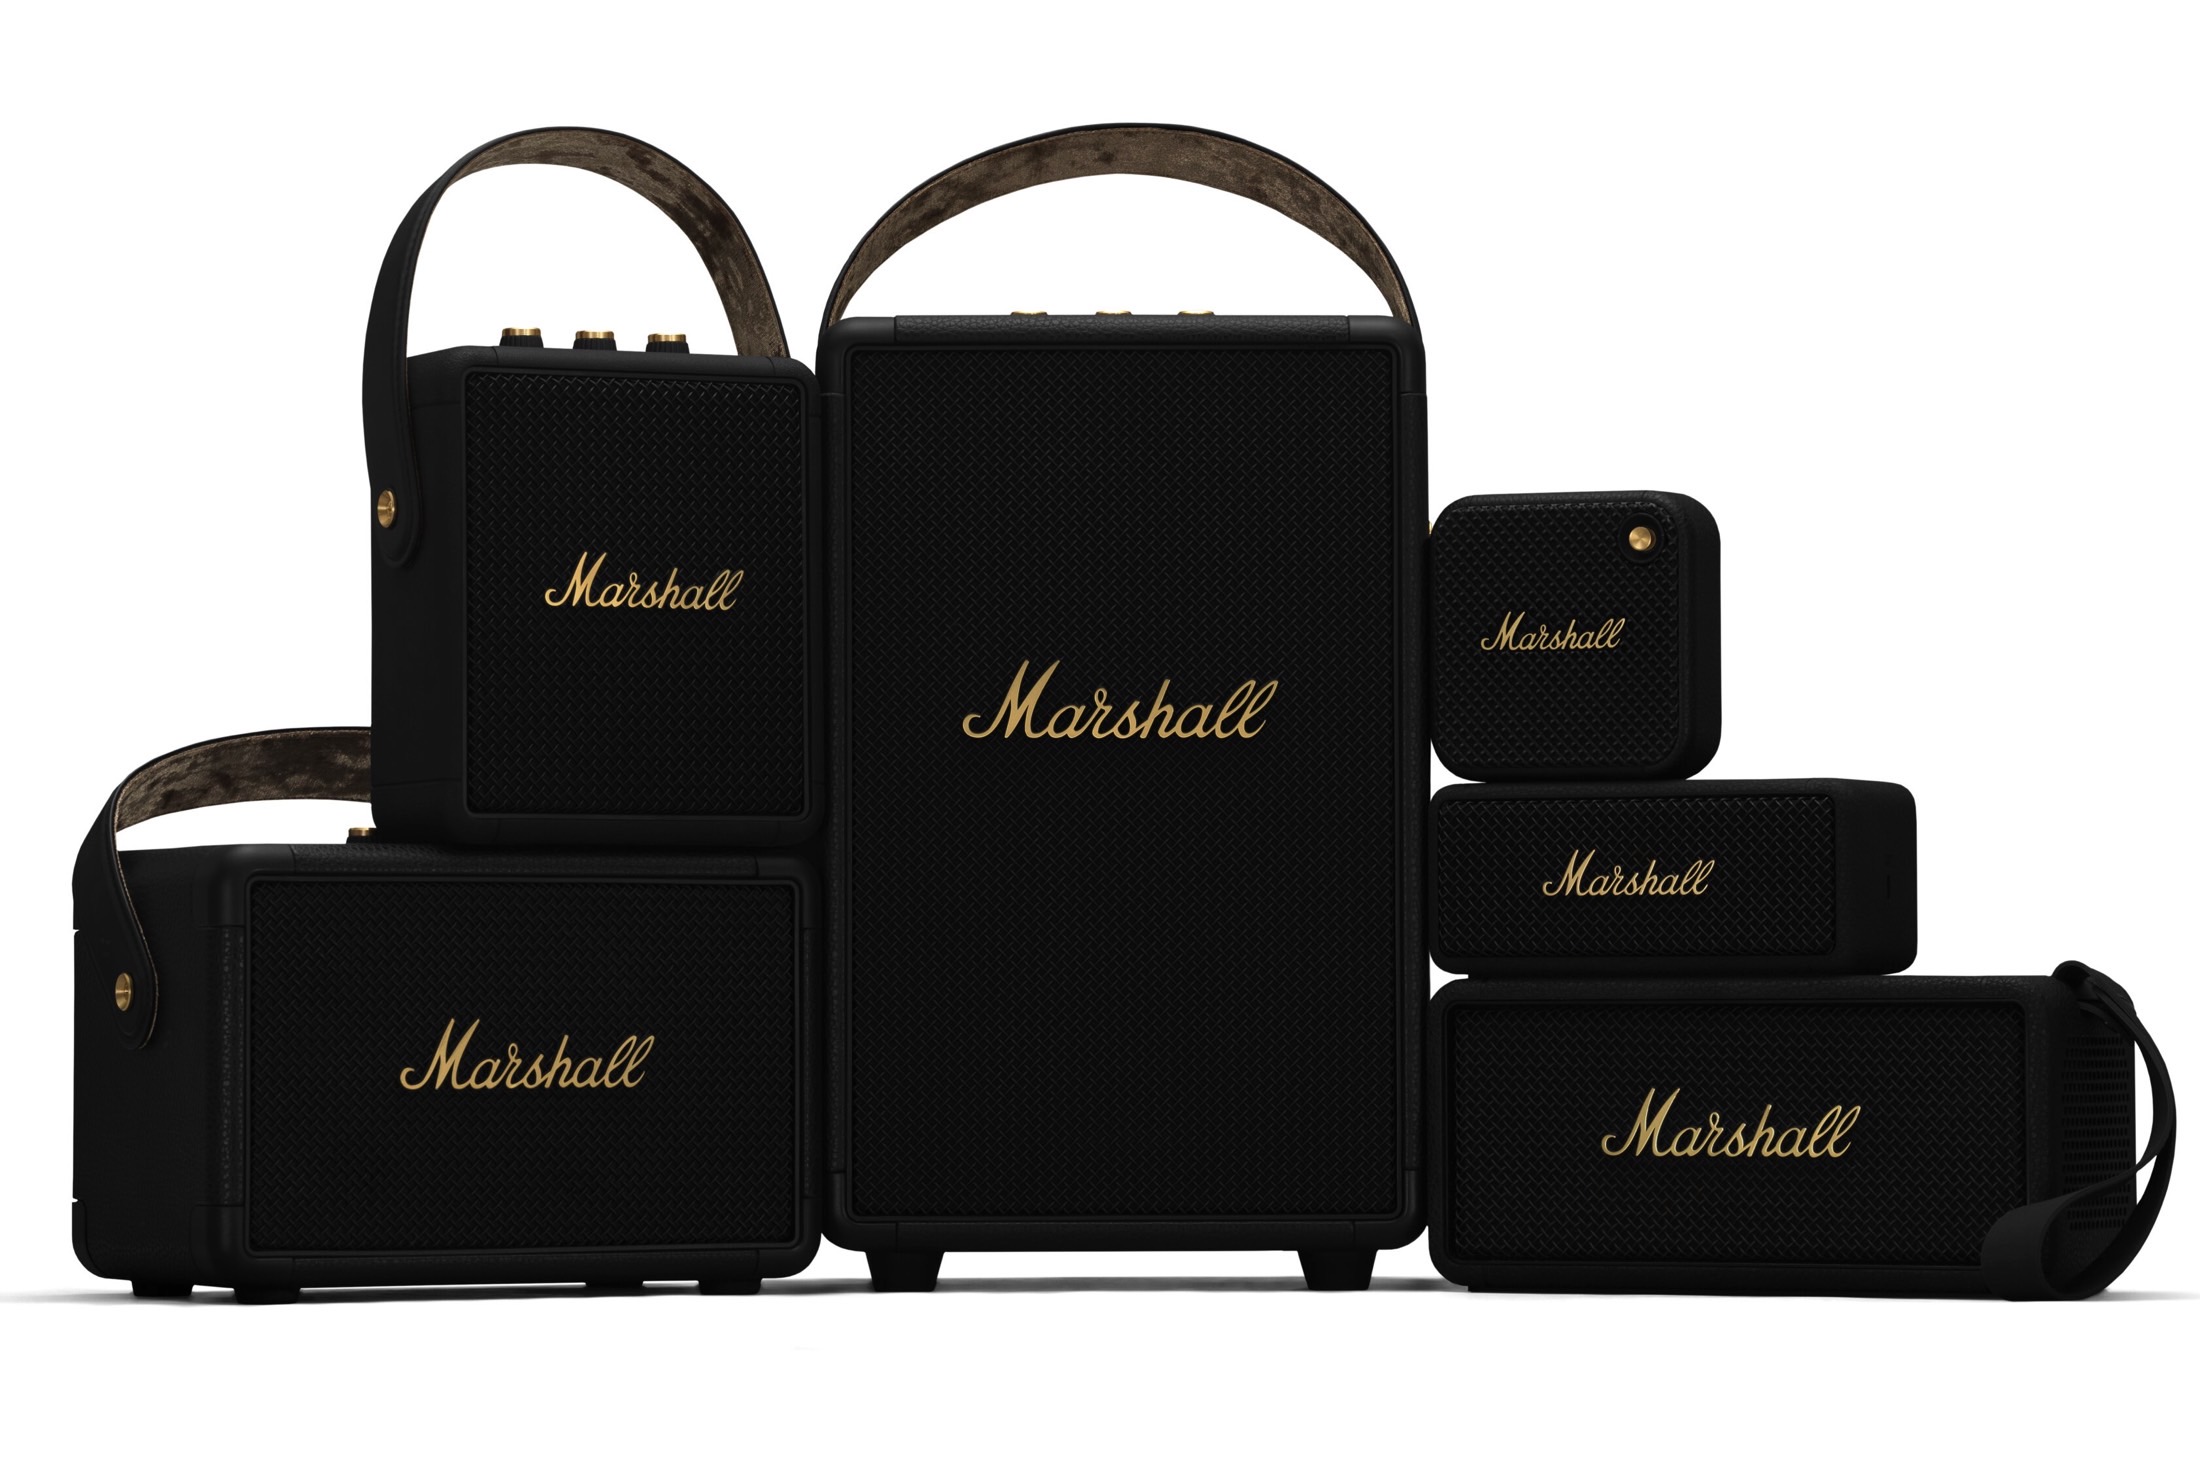 Marshall Middleton seen with Marshall's family of portable speakers.